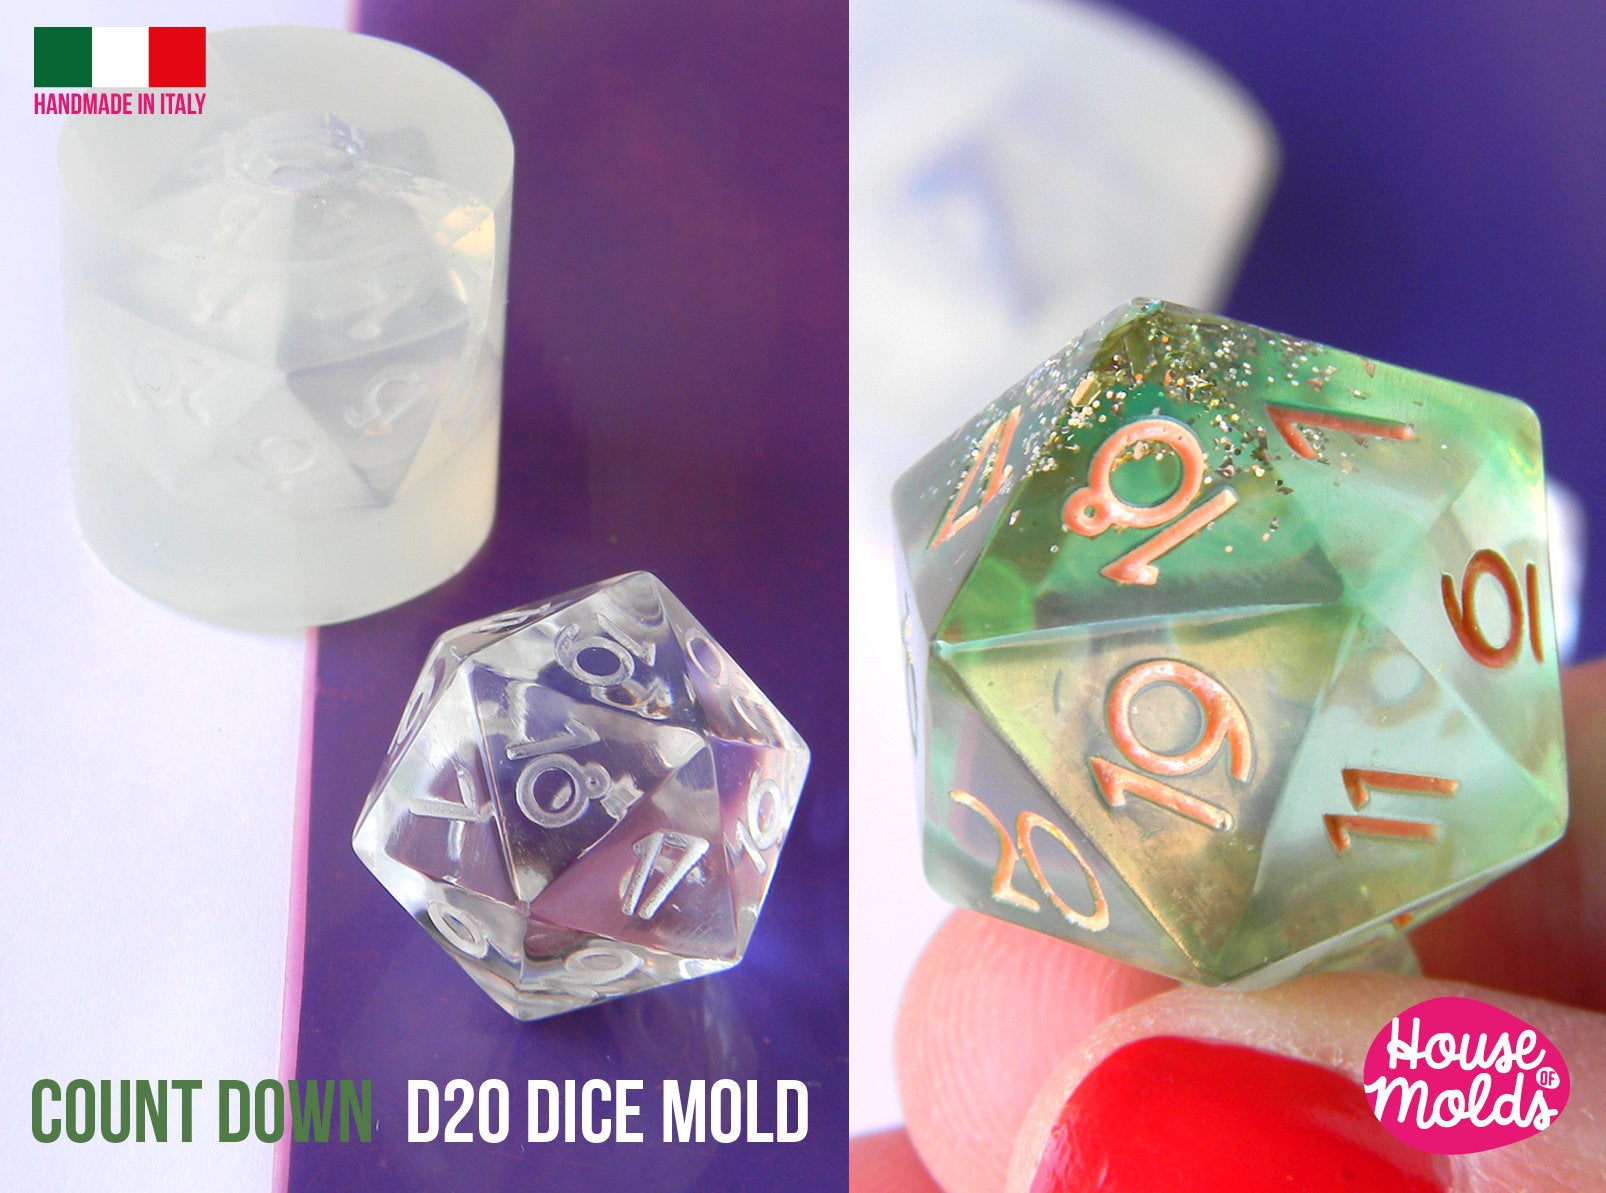 Count Down D20 Dice Clear Silicone Mold -size 21 x 21 mm - HOUSE